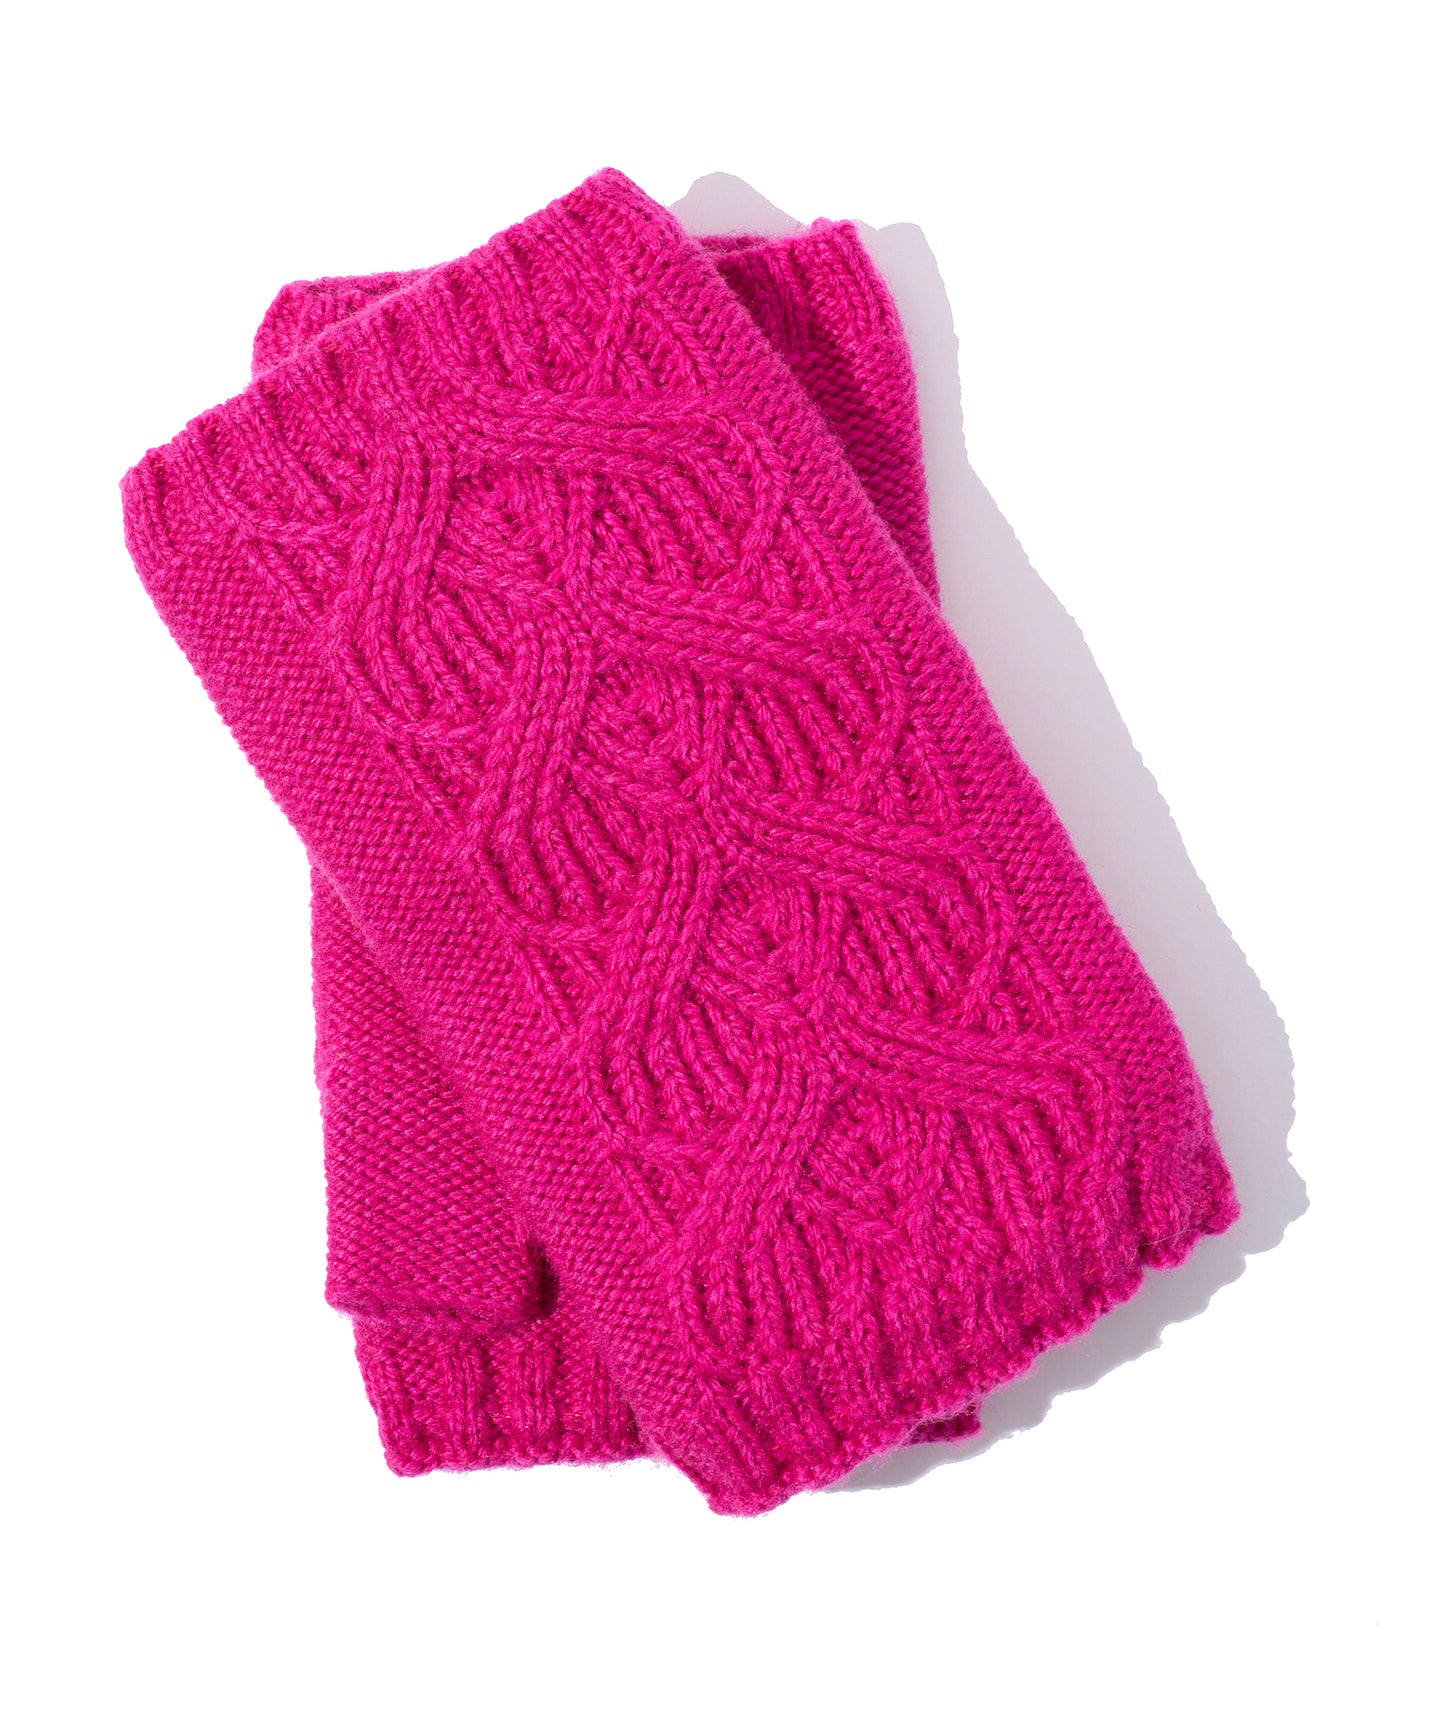 Loopy Cable Handwarmer in color Electric Pink